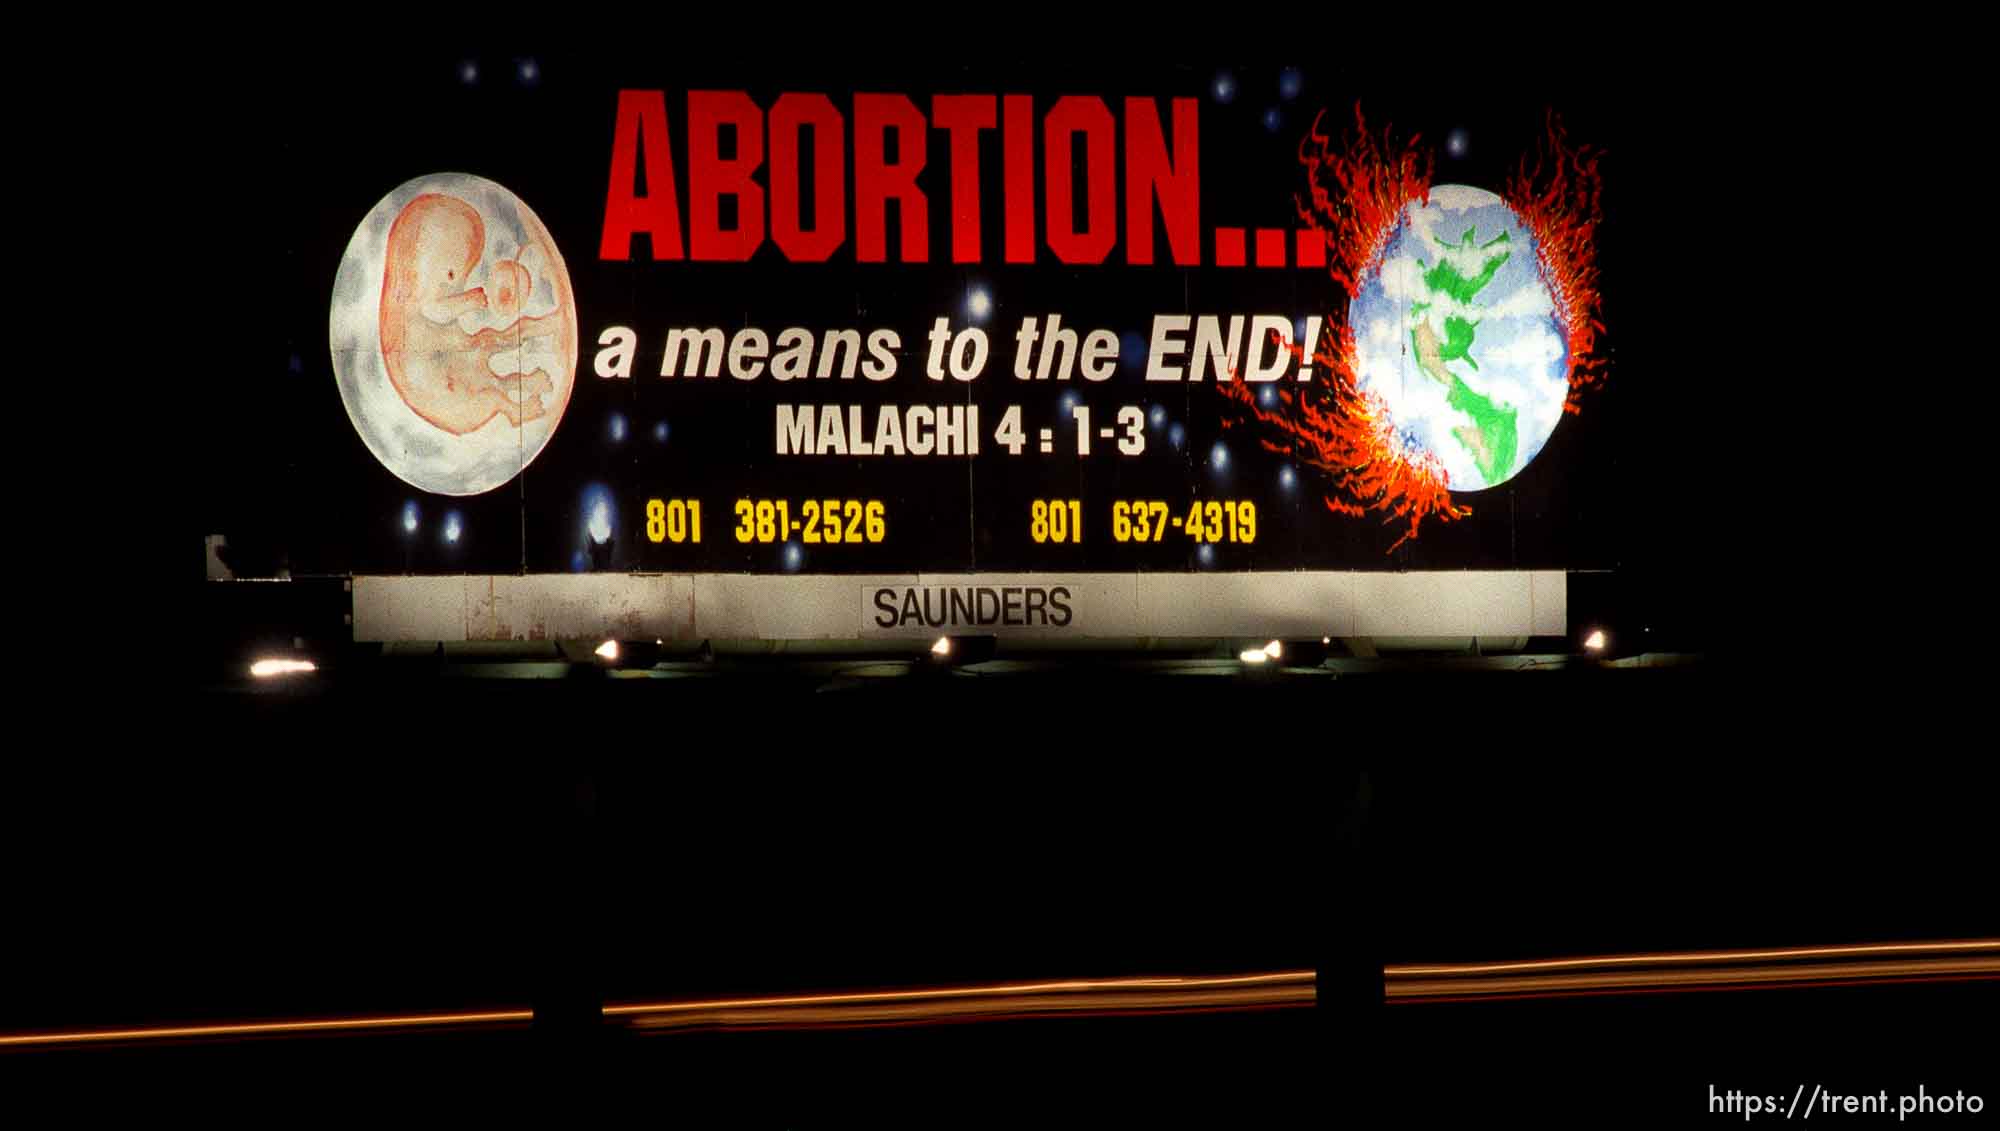 Abortion a means to the end